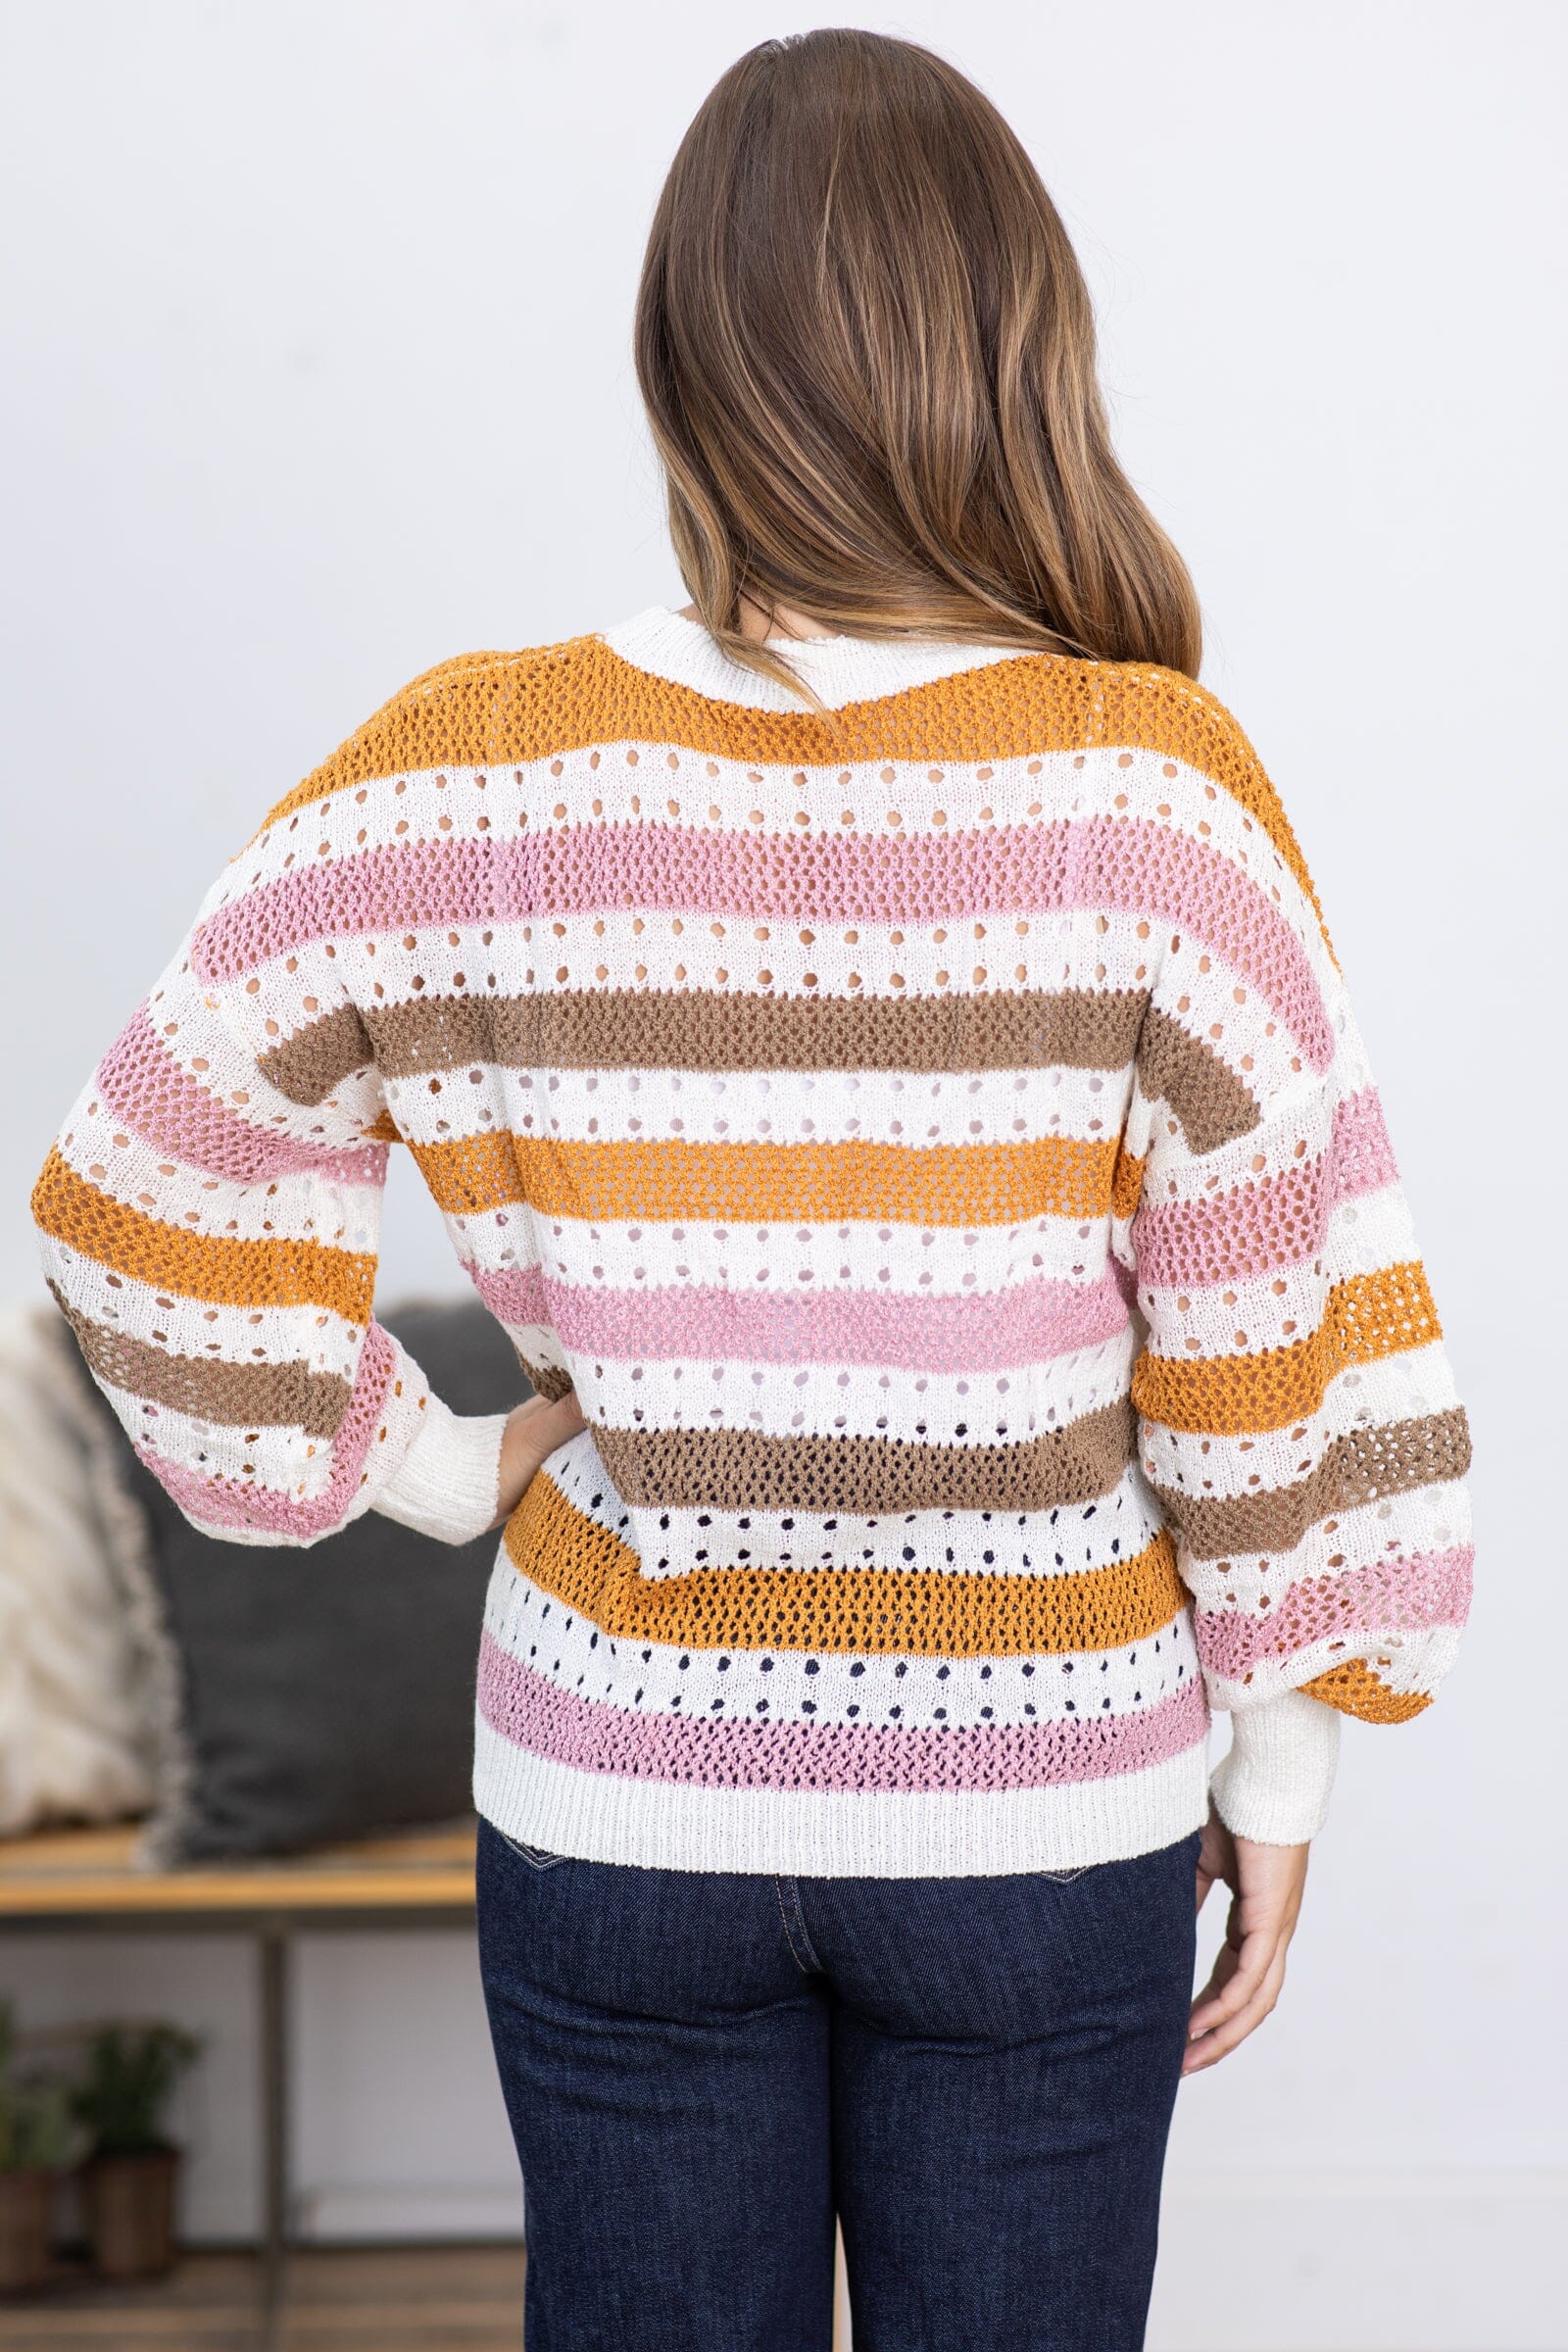 Copper and Blush Stripe Open Knit Sweater - Filly Flair